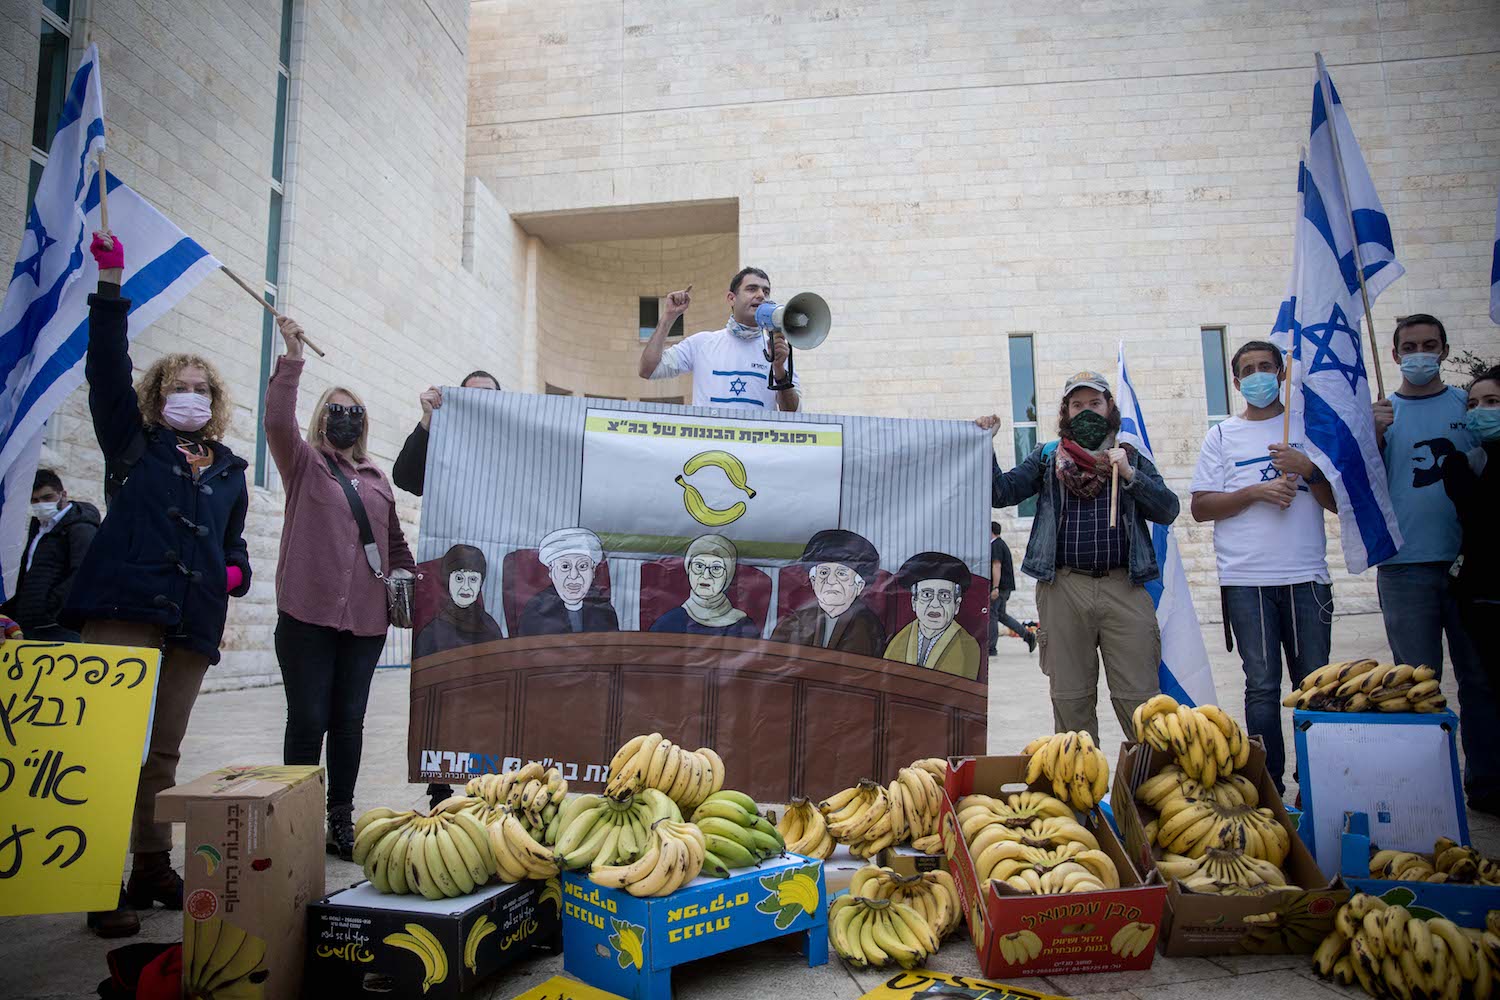 Members of the far-right 'Im Tirzu' movement protest protest outside the Supreme Court in Jerusalem during a hearing on the Jewish Nation-State Law. The activists decried the court as an Islamic "banana republic," December 22, 2020. (Yonatan Sindel/Flash90)